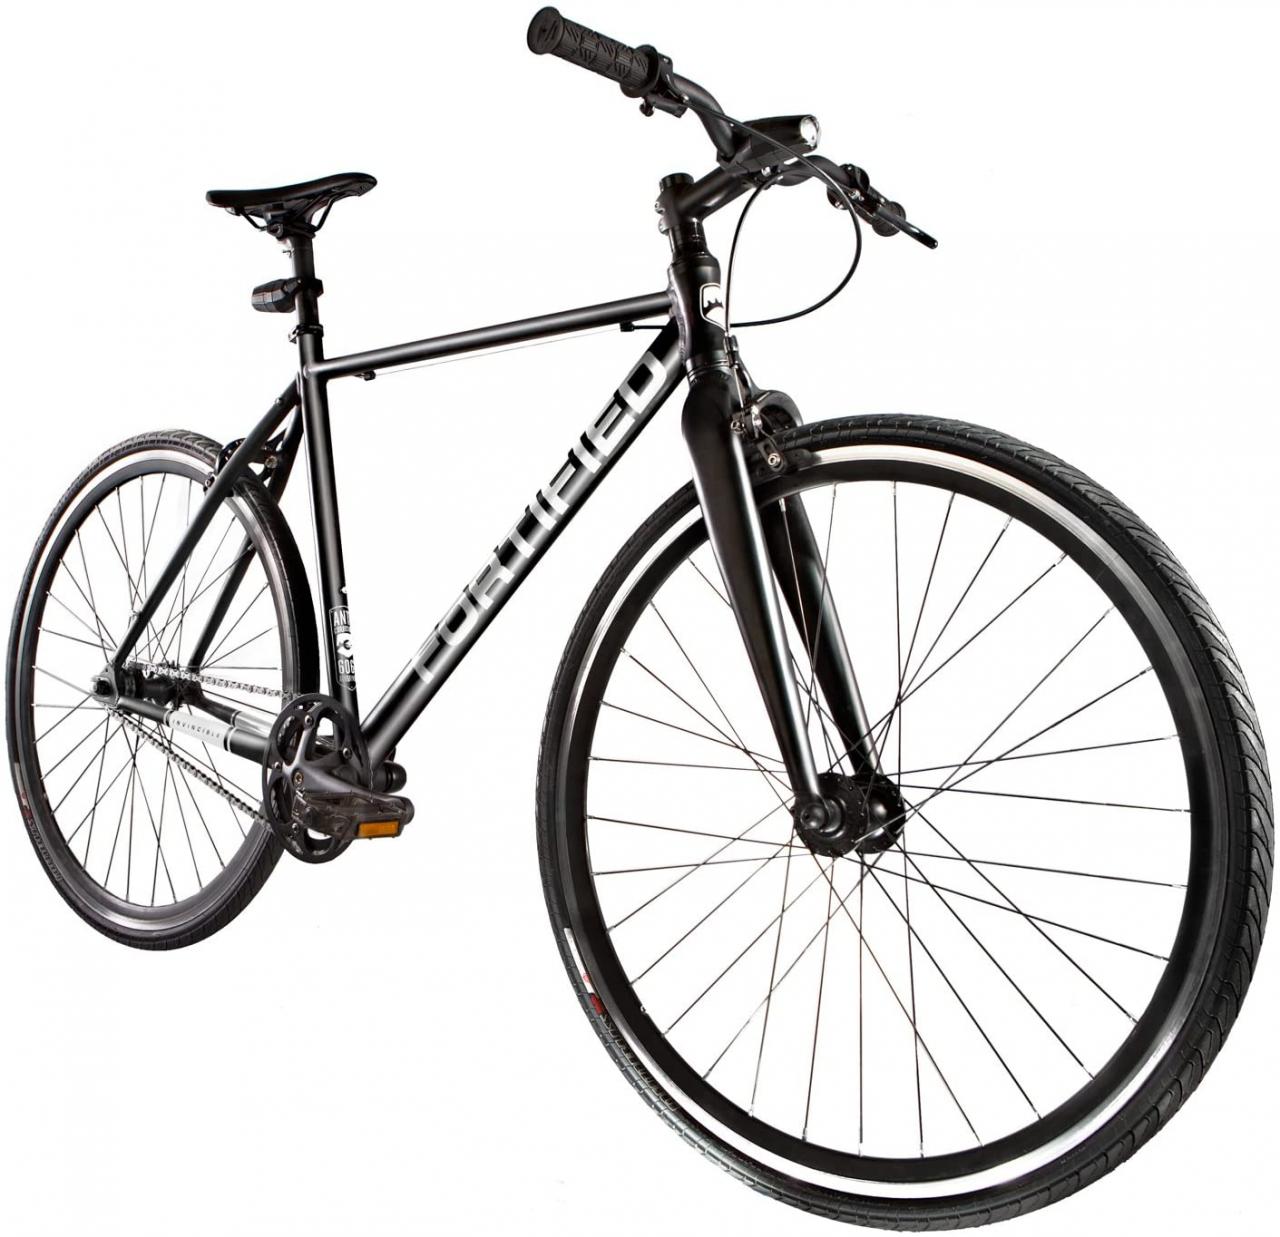 Fortified City Commuter Theft-Resistant Single Speed Bike (Large (58cm)) :  Amazon.co.uk: Sports & Outdoors